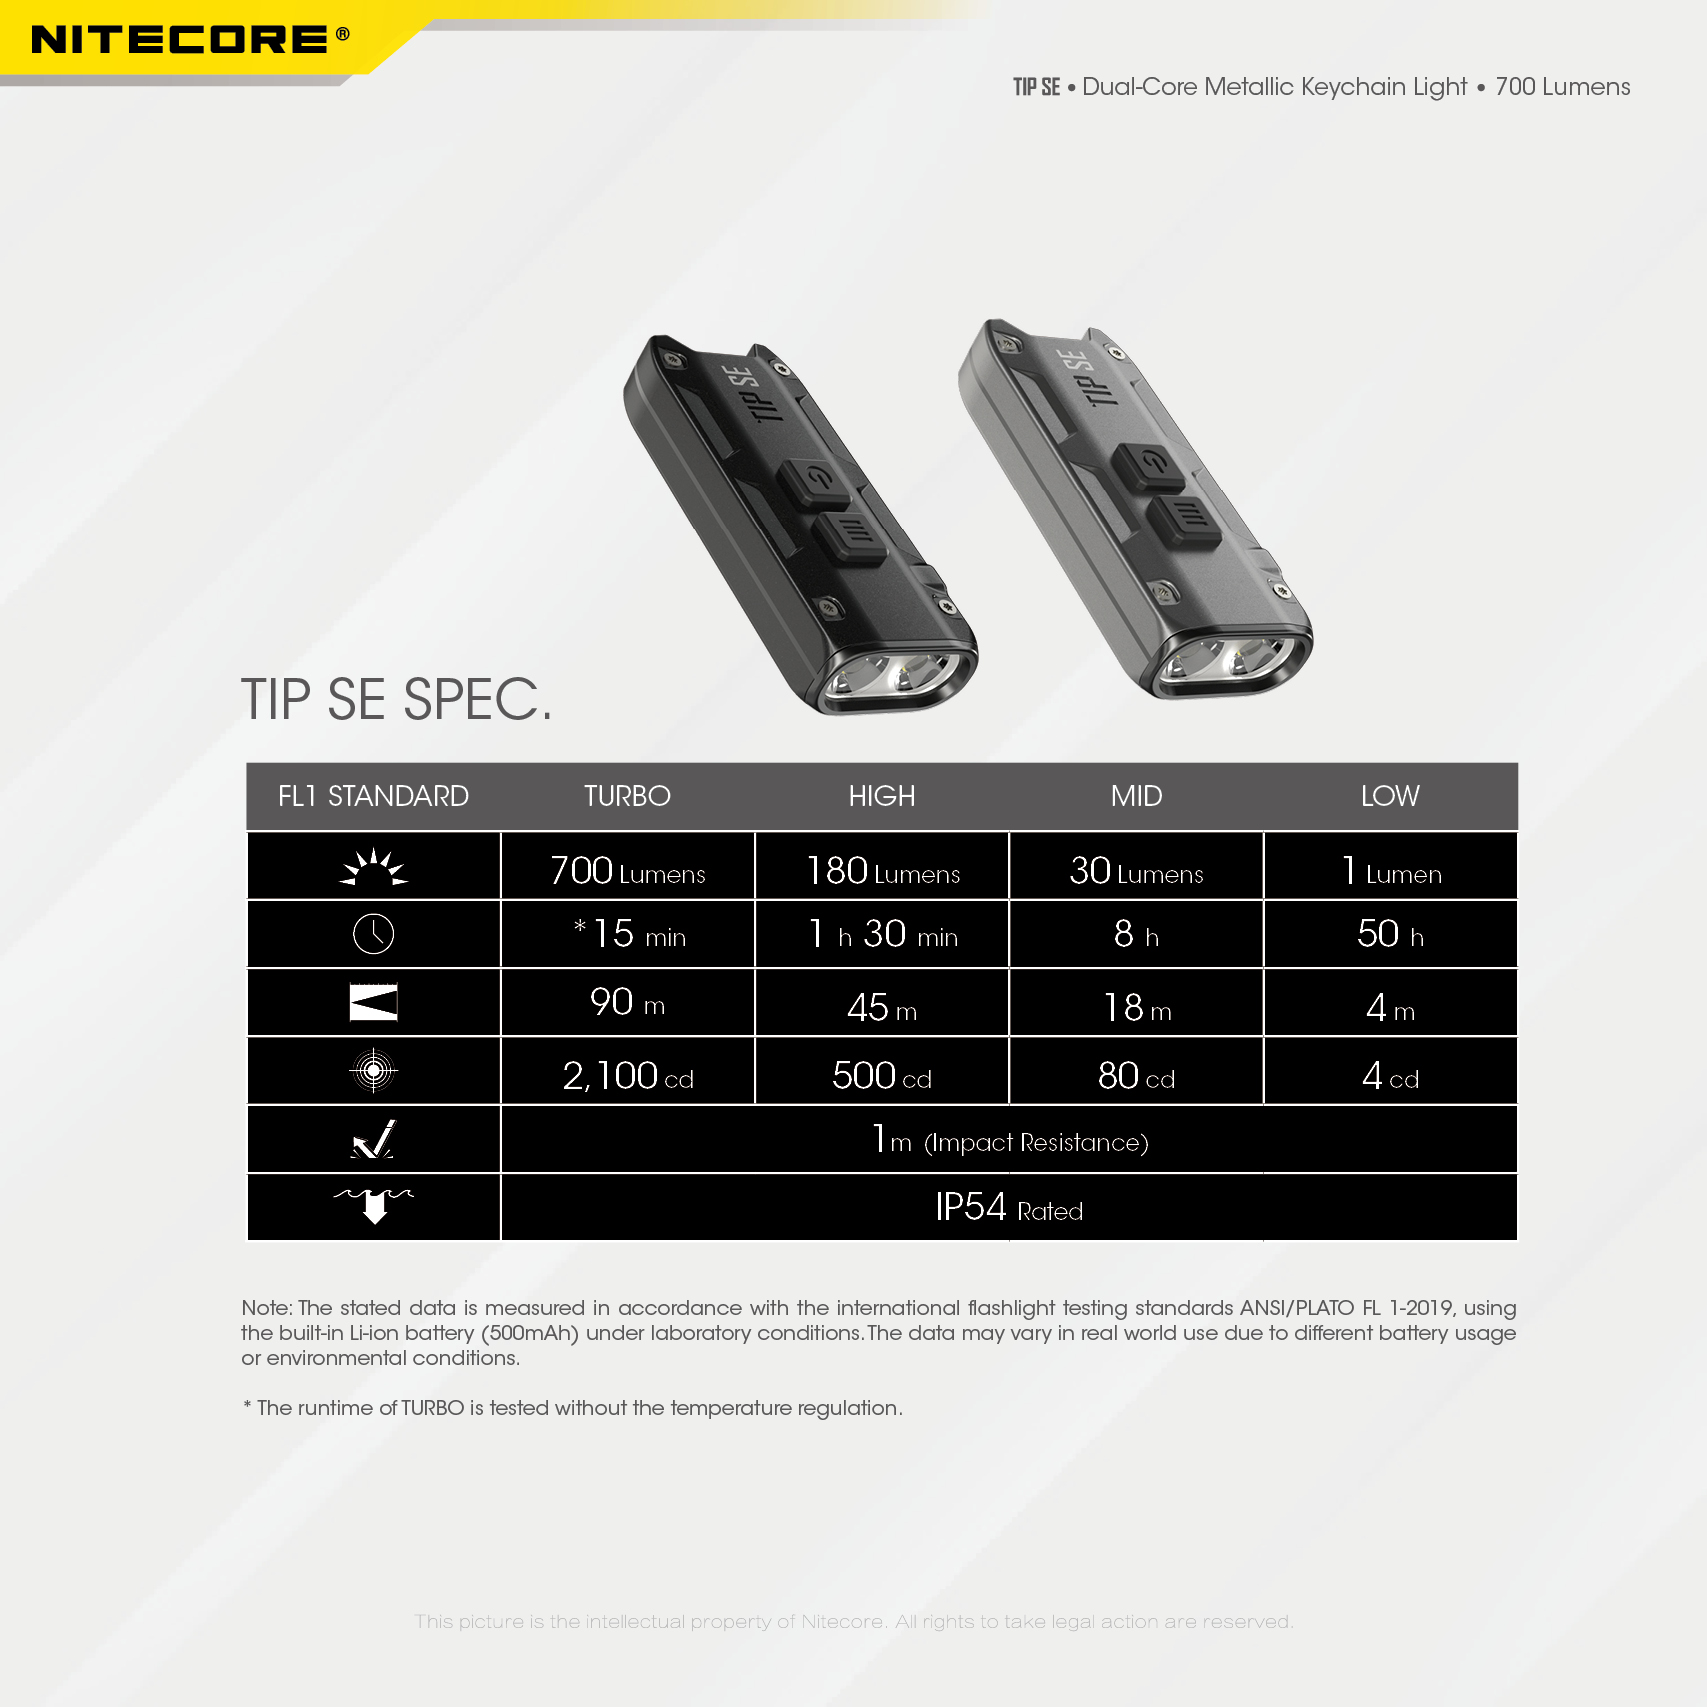 NITECORE-TIP-SE-700LM-P8-Dual-Light-LED-Keychain-Flashlight-Type-C-Rechargeable-QC-Every-Day-Carry-M-1976045-20